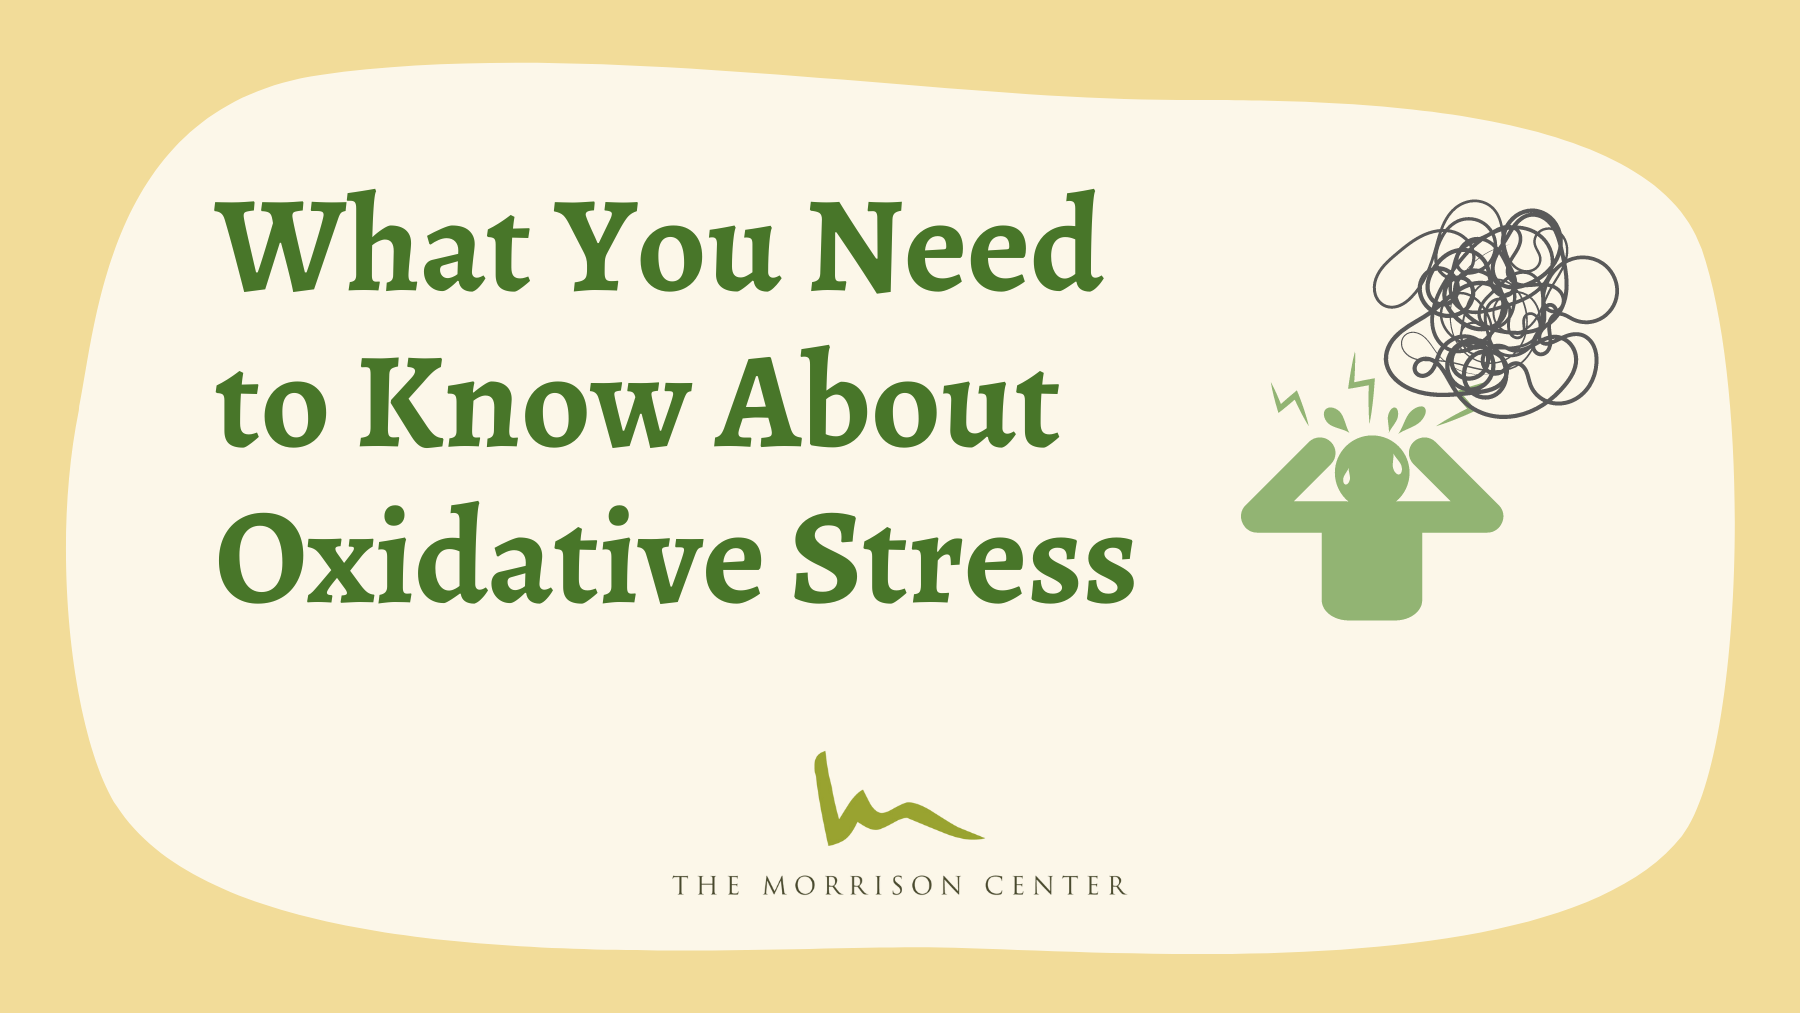 What You Need to Know About Oxidative Stress